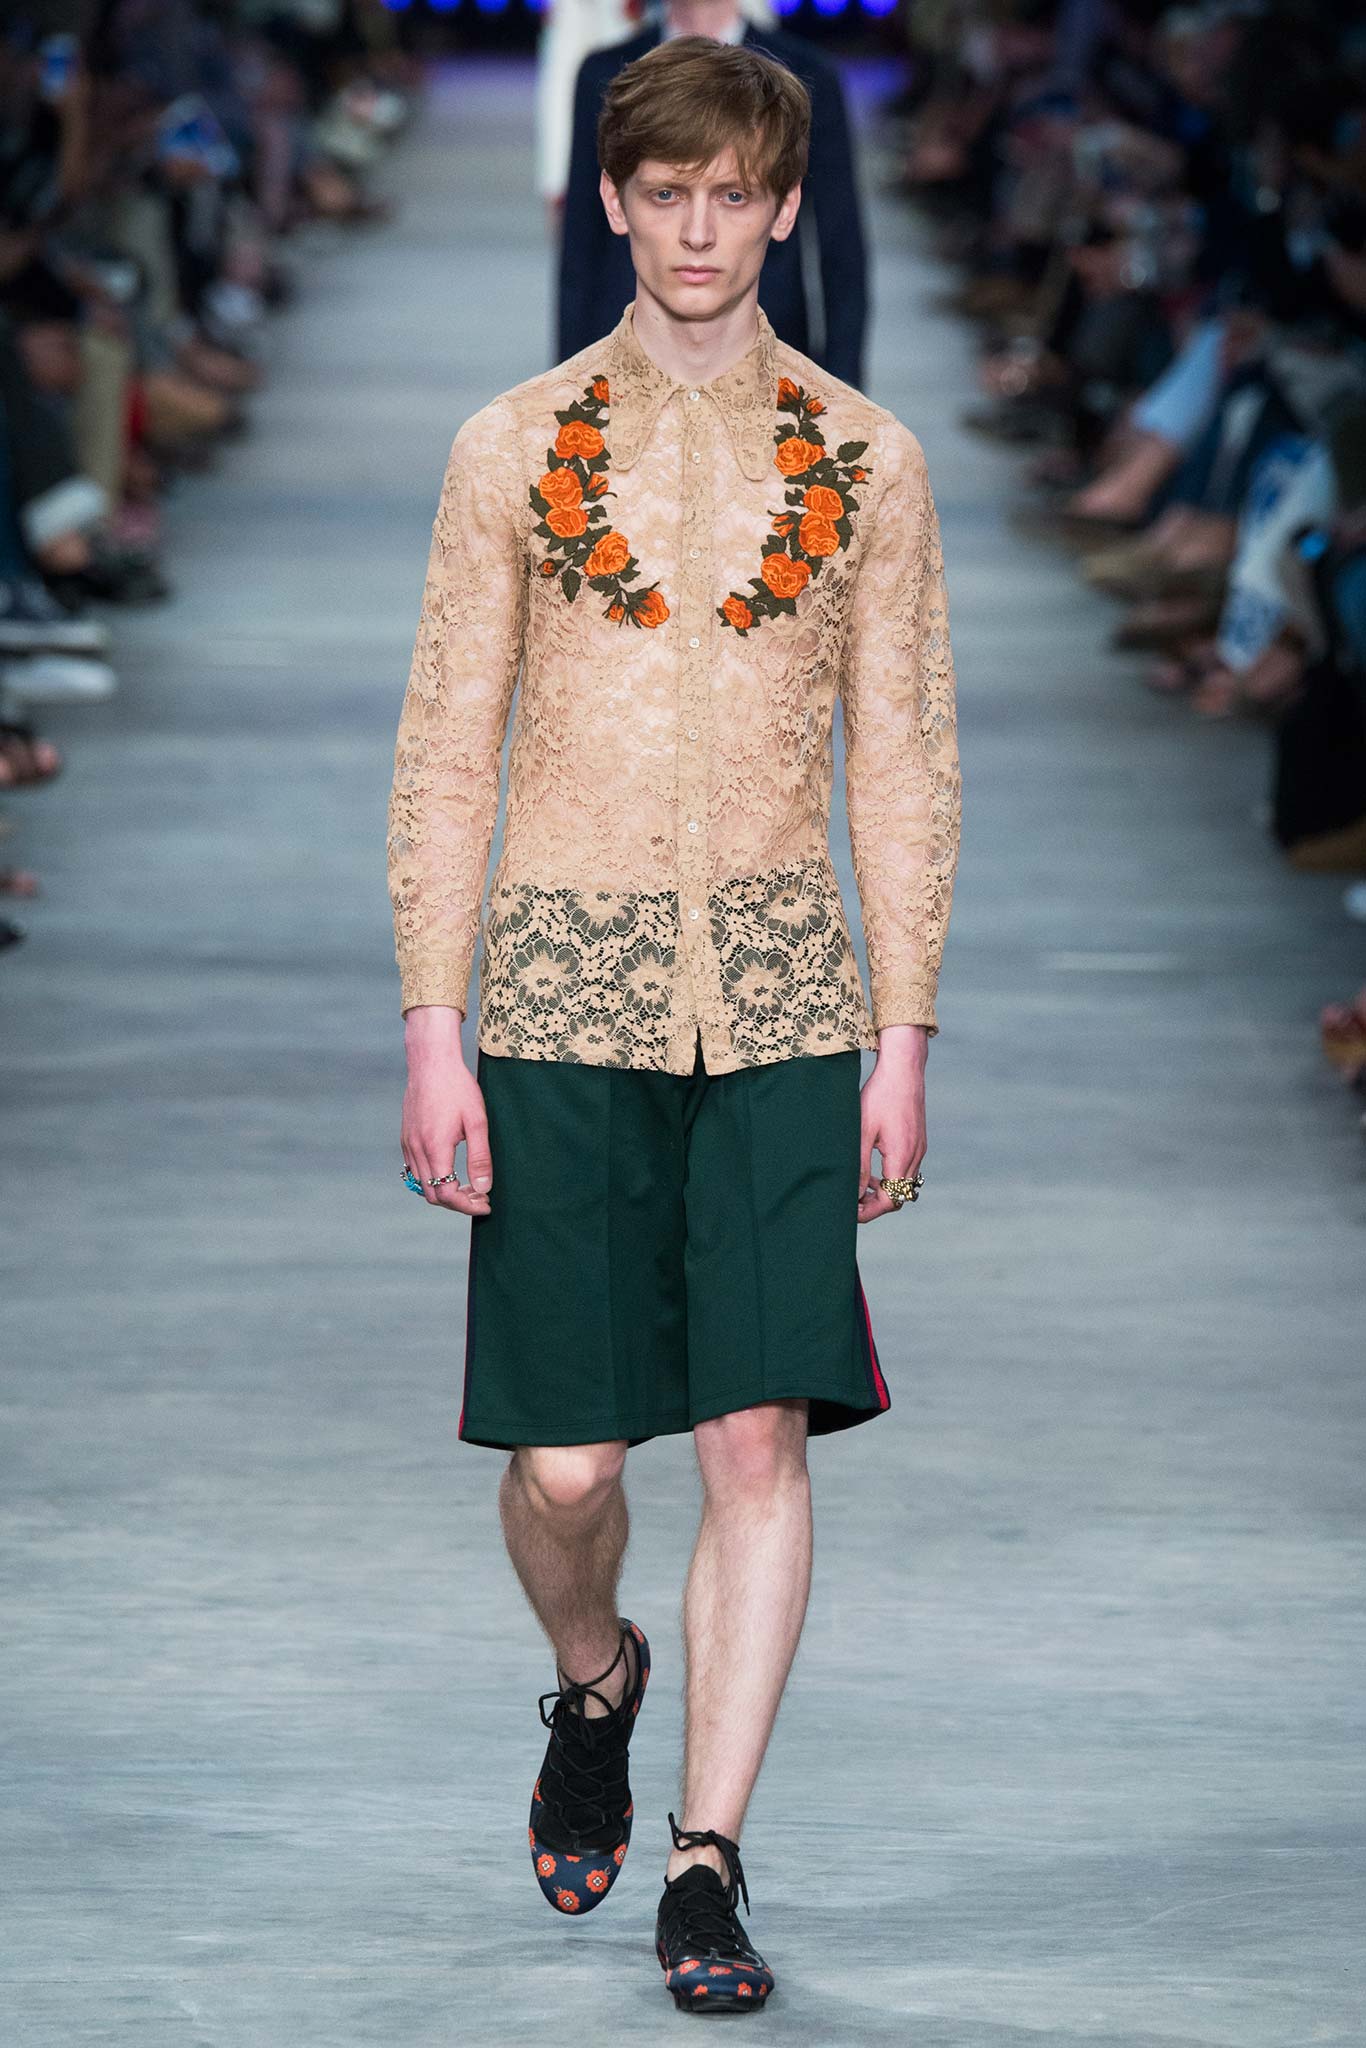 spring-2016-menswear-trends-01-lace-04